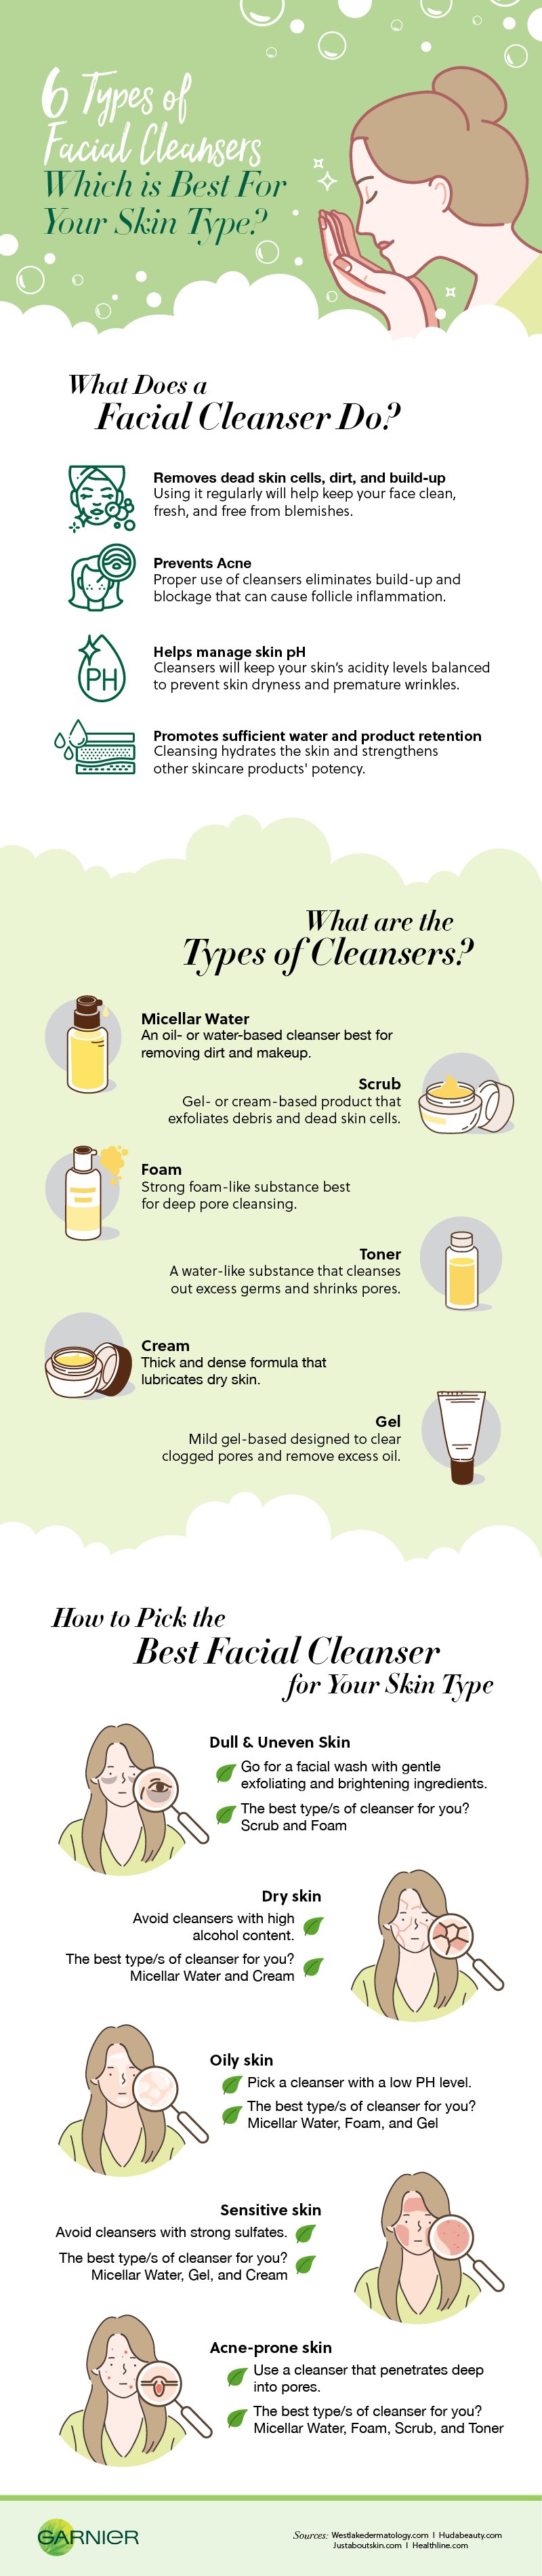 8 Types of Cleansers for Your Face & How to Use Them